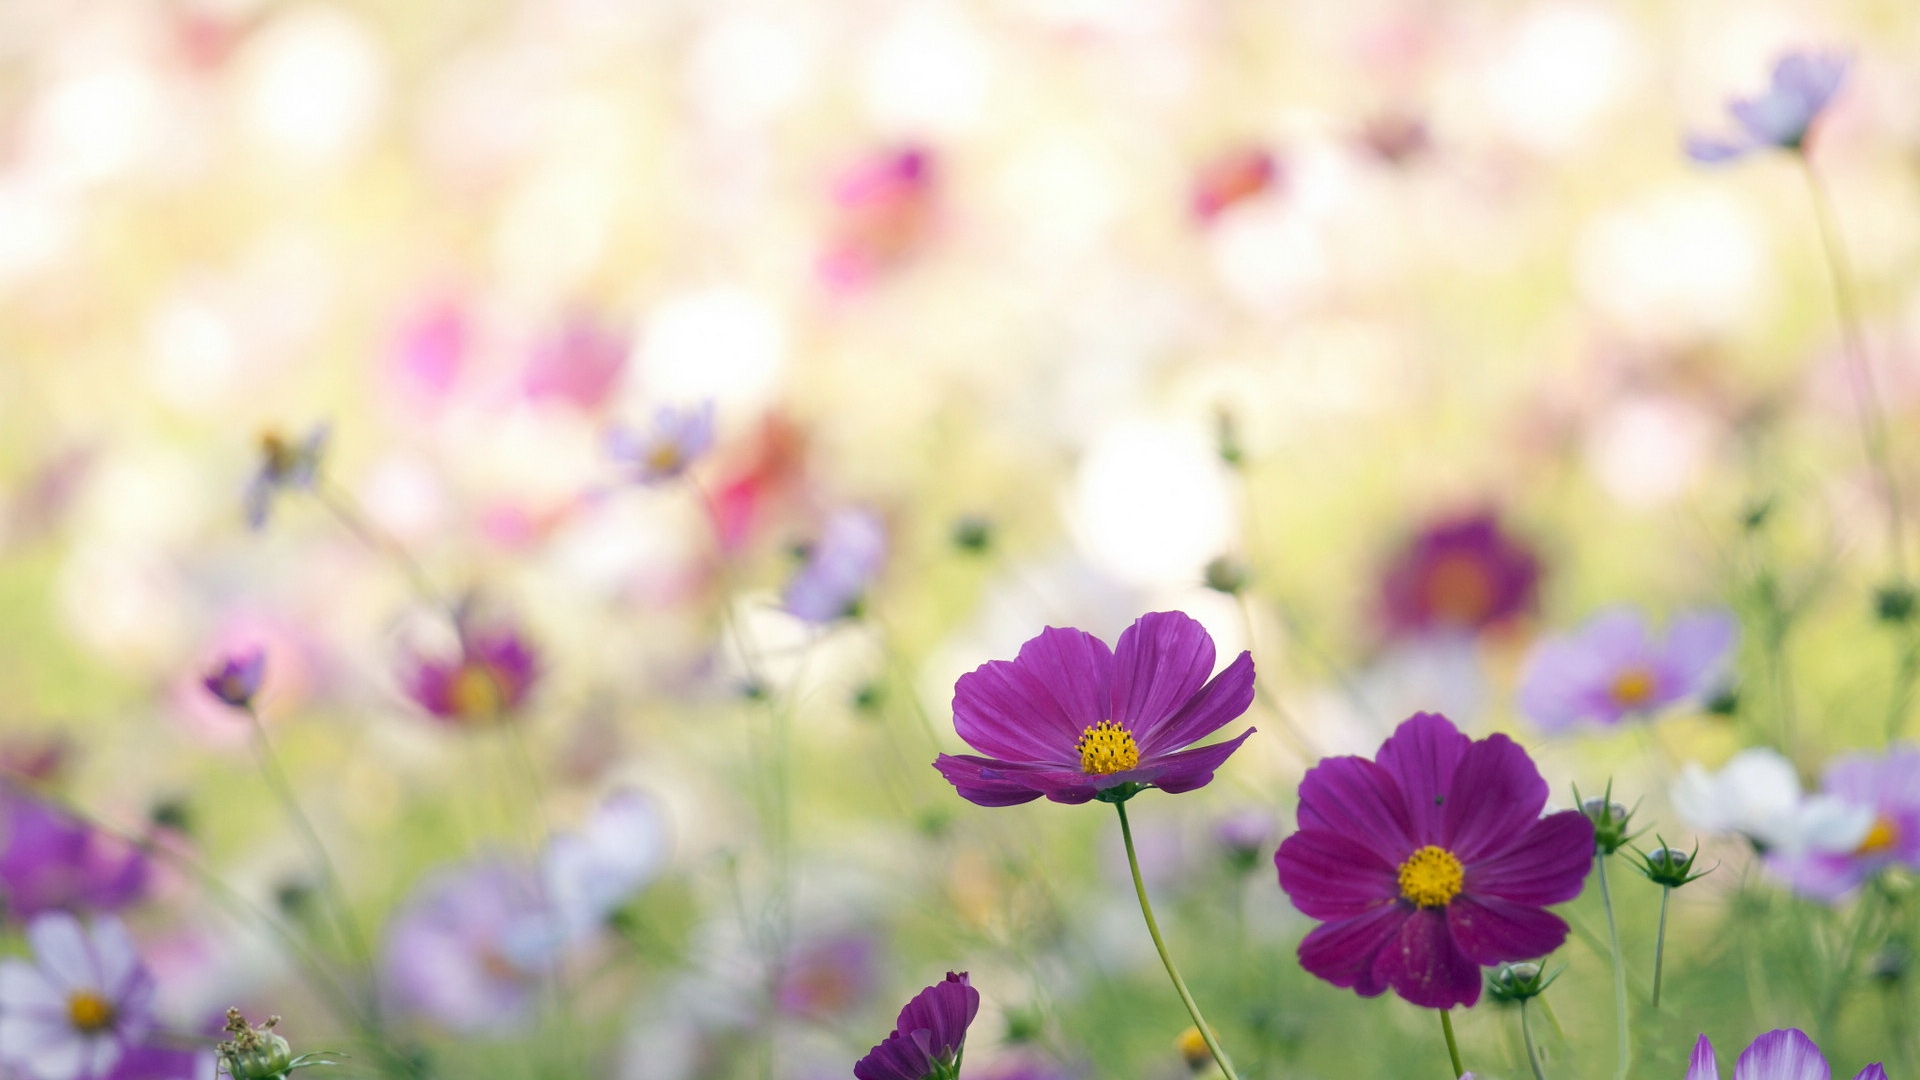 Spring Wildflowers Photos Feel Atmosphere All Time With